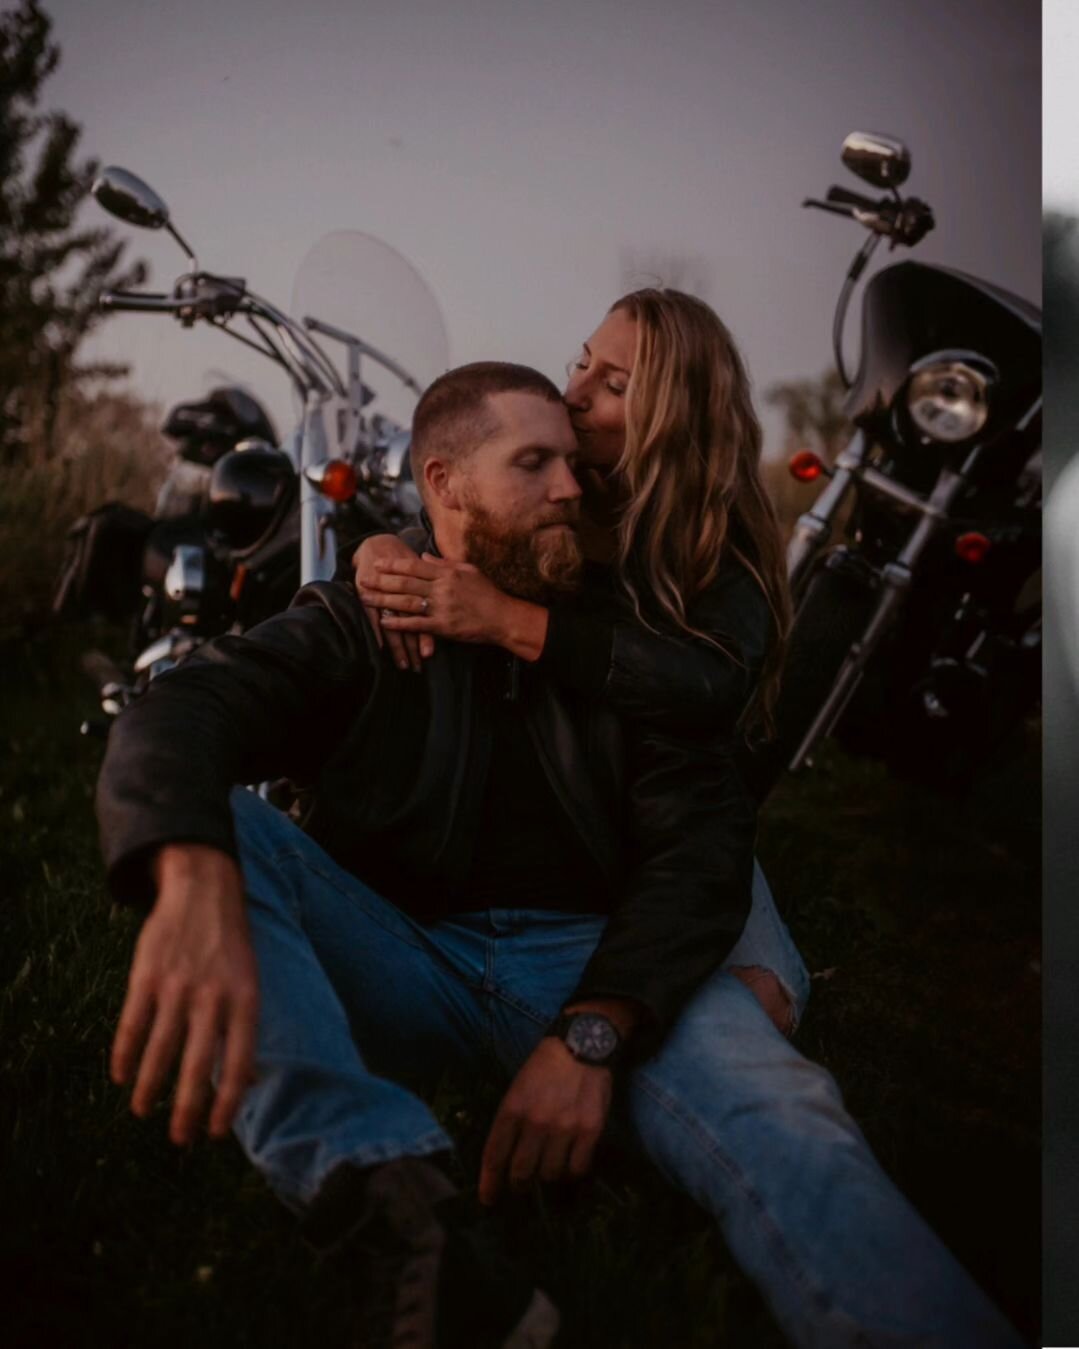 Bikes, hot couple, golden hour, and a few mosquito bites 🩶🫶 

.
.
. 

#wainfleet #portcolborne #engagementphotographer #niagaraphotographer #niagaraweddingphotographer #foxpresets #niagaraengagementshoot #niagaraengagementphotography